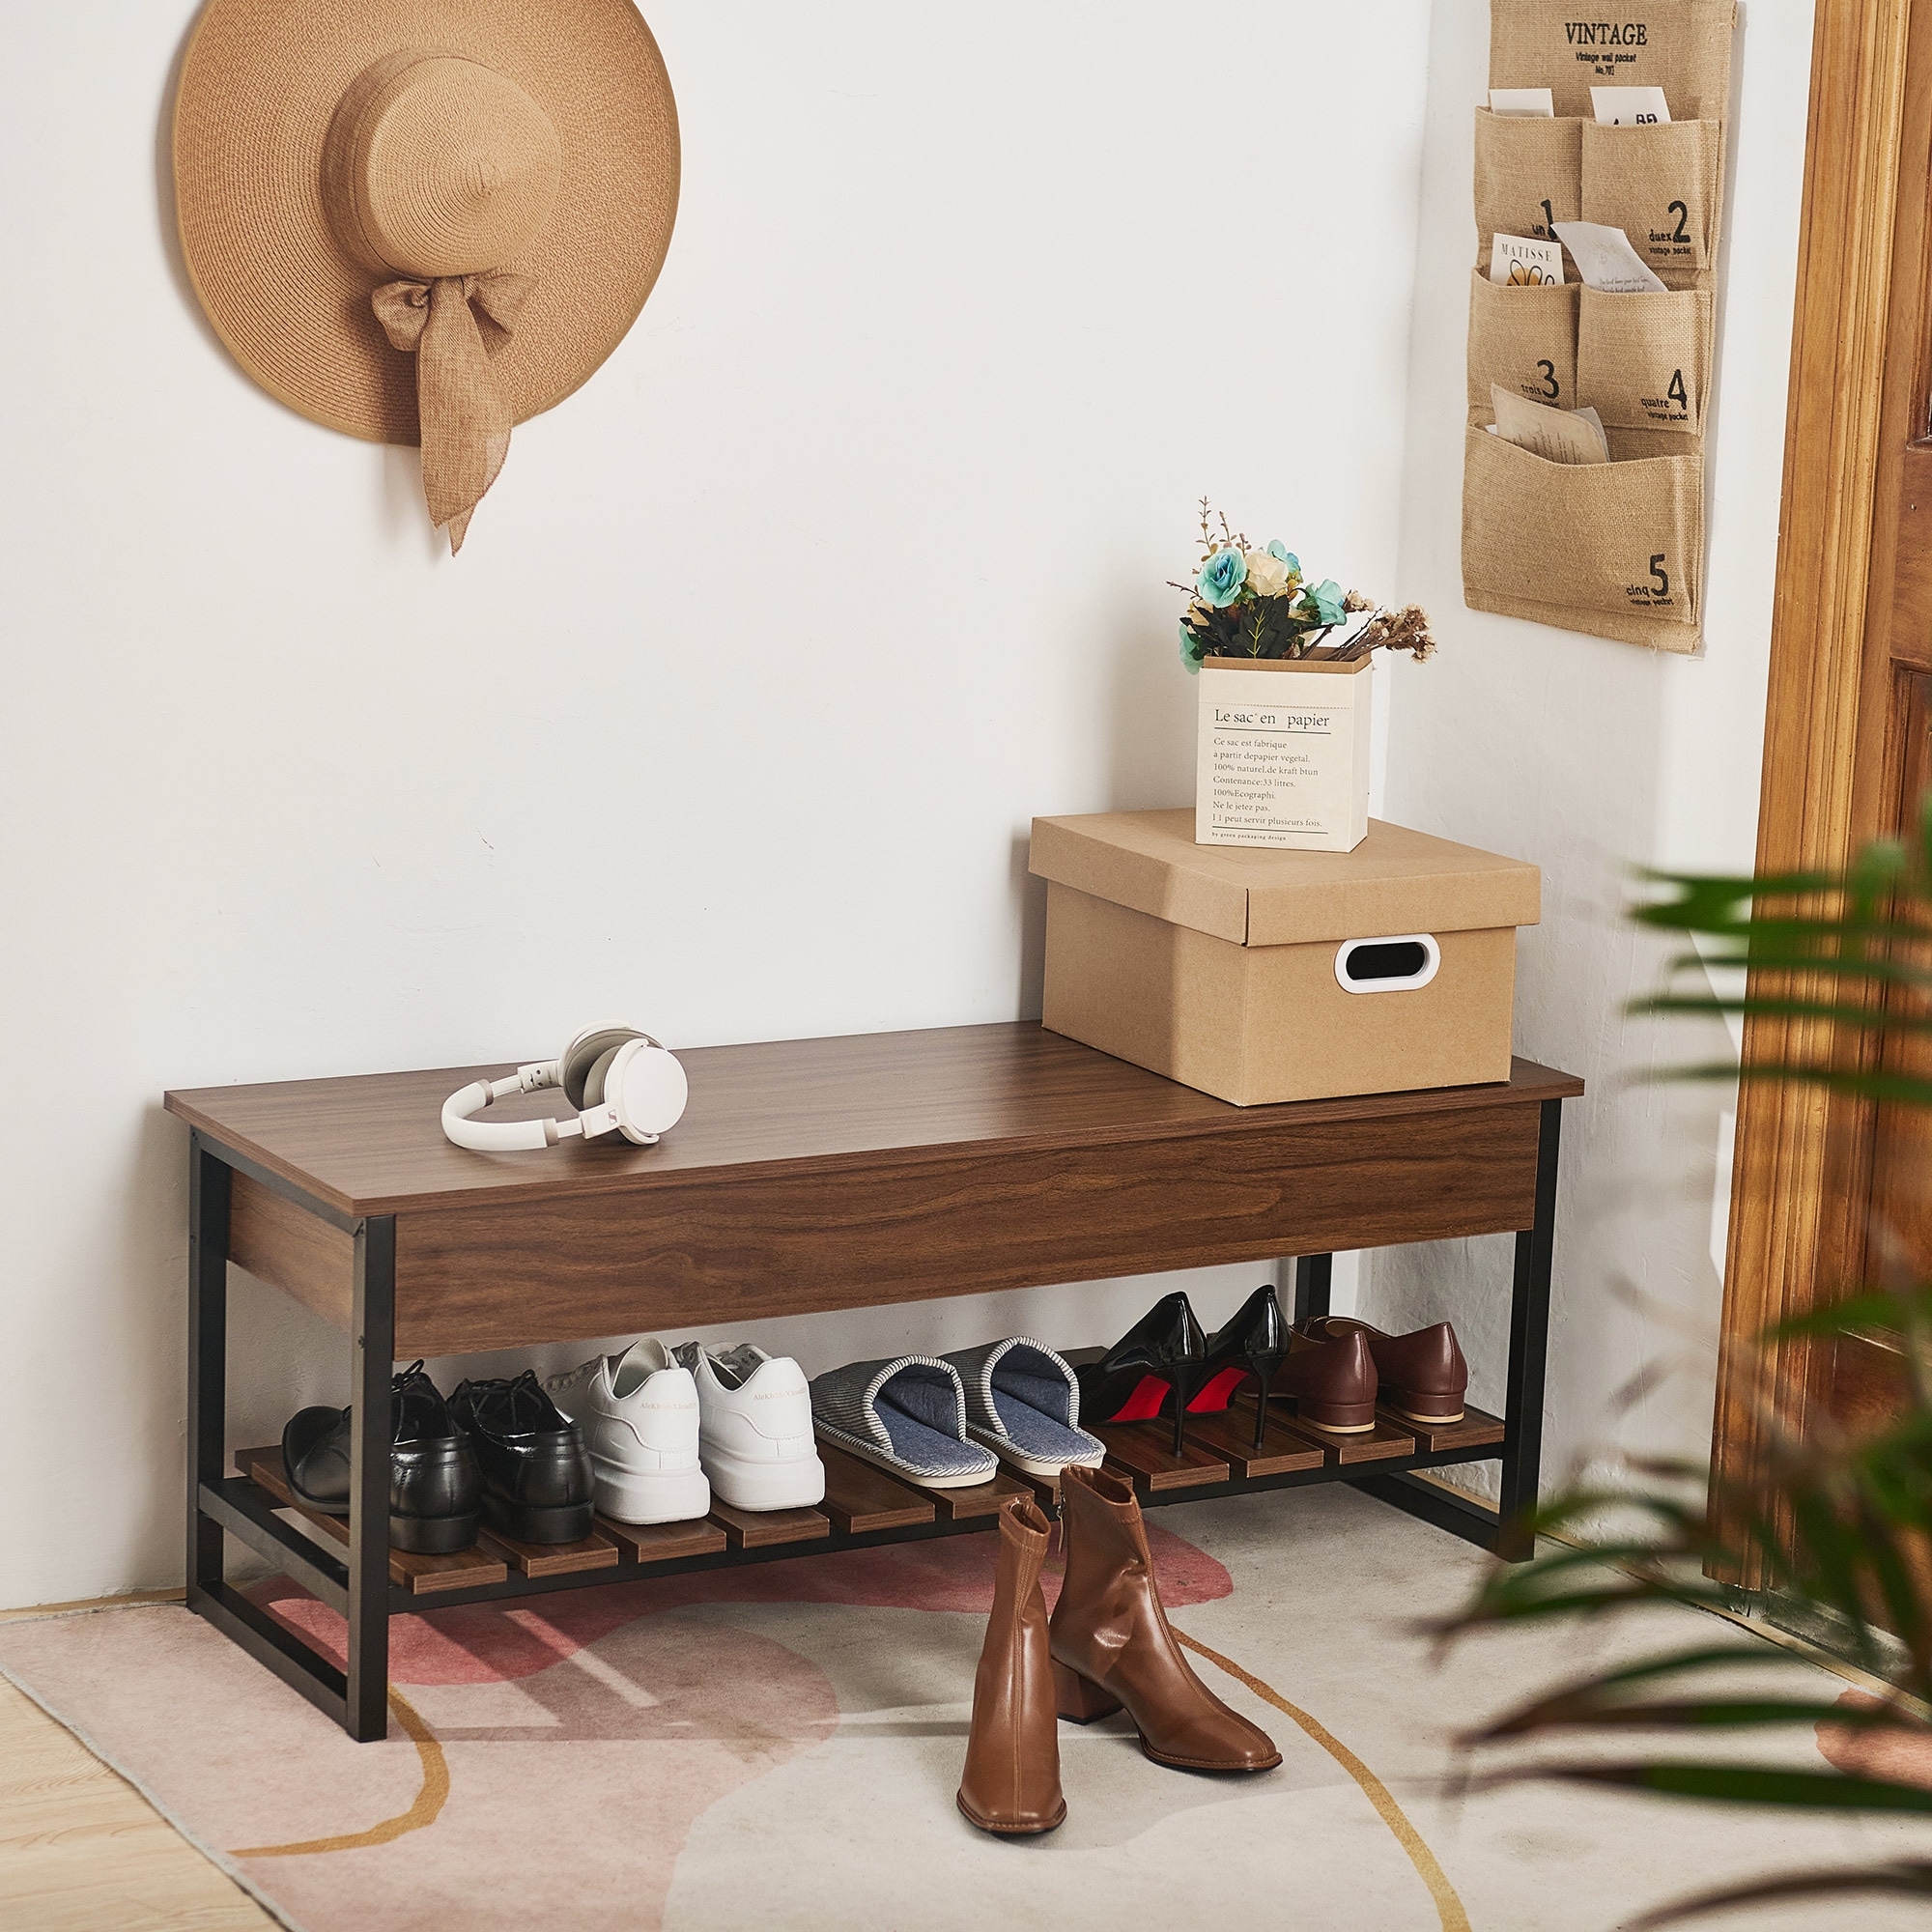 https://ak1.ostkcdn.com/images/products/is/images/direct/7ebbb77fc5dd2639d6915826287ad26be394335a/CO-Z-Lift-Top-Entryway-Shoe-Storage-Bench-with-Shelf.jpg